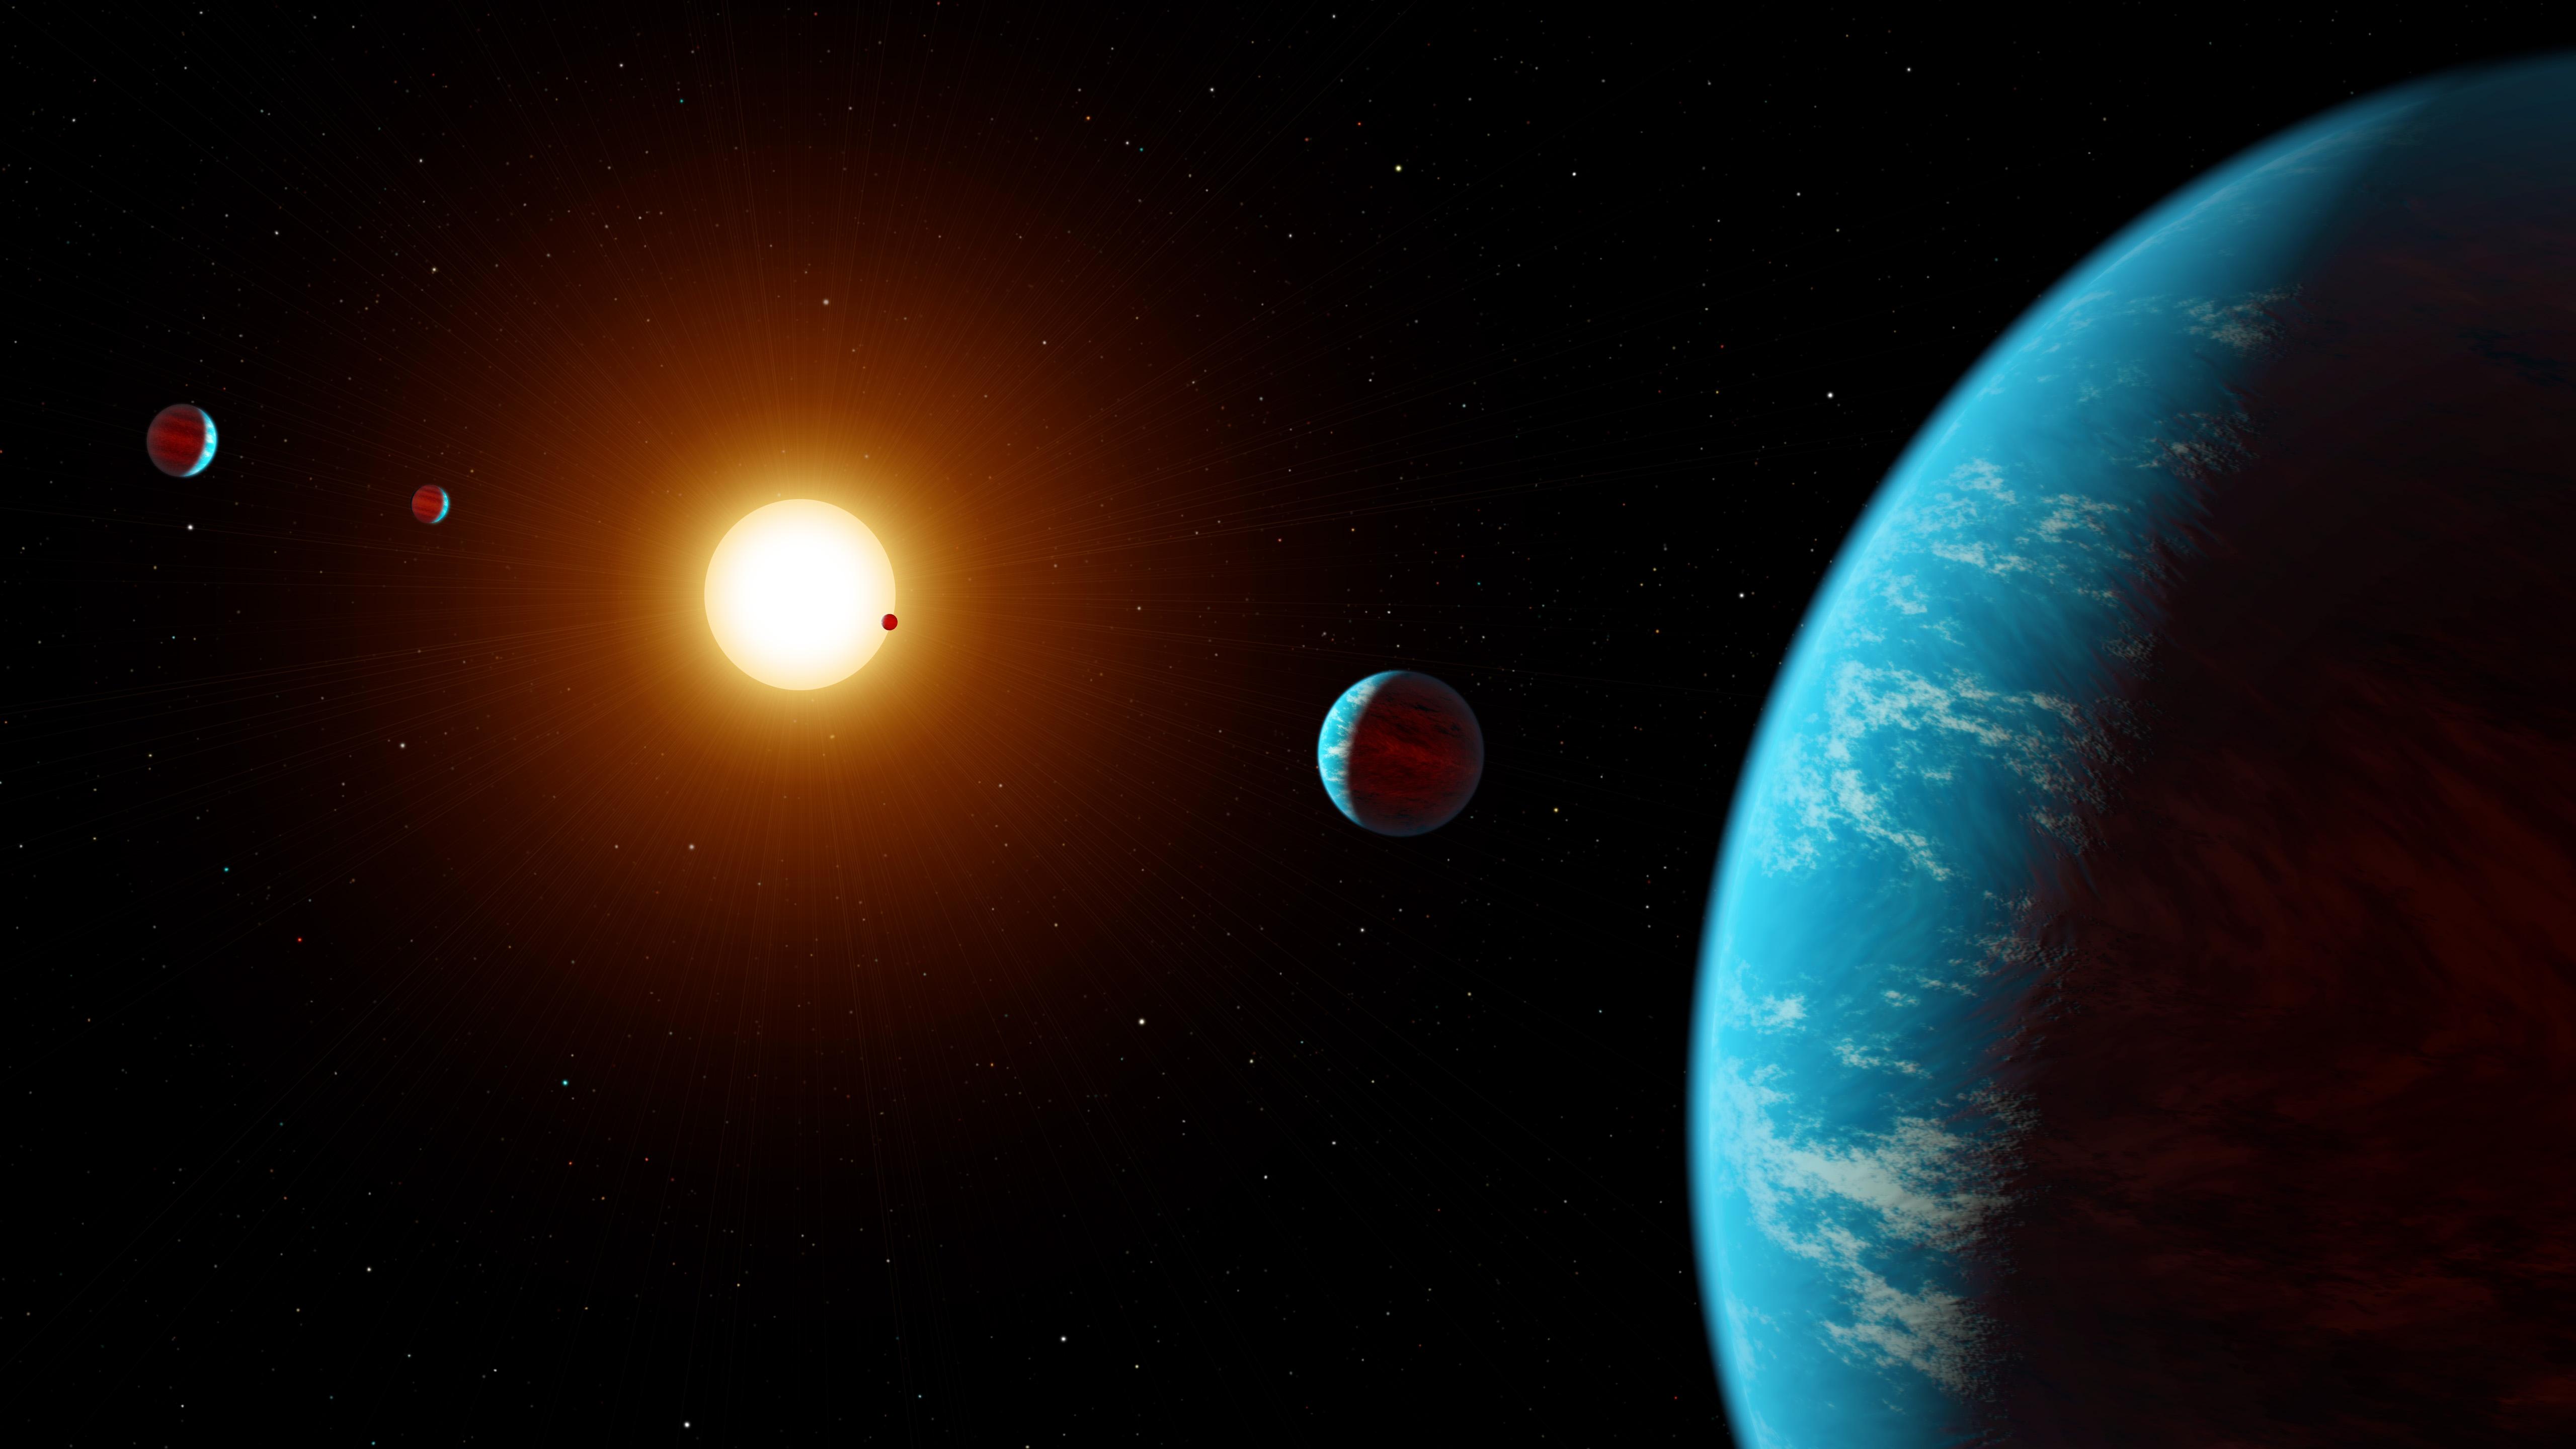 5 Exoplanet system_PIA22088